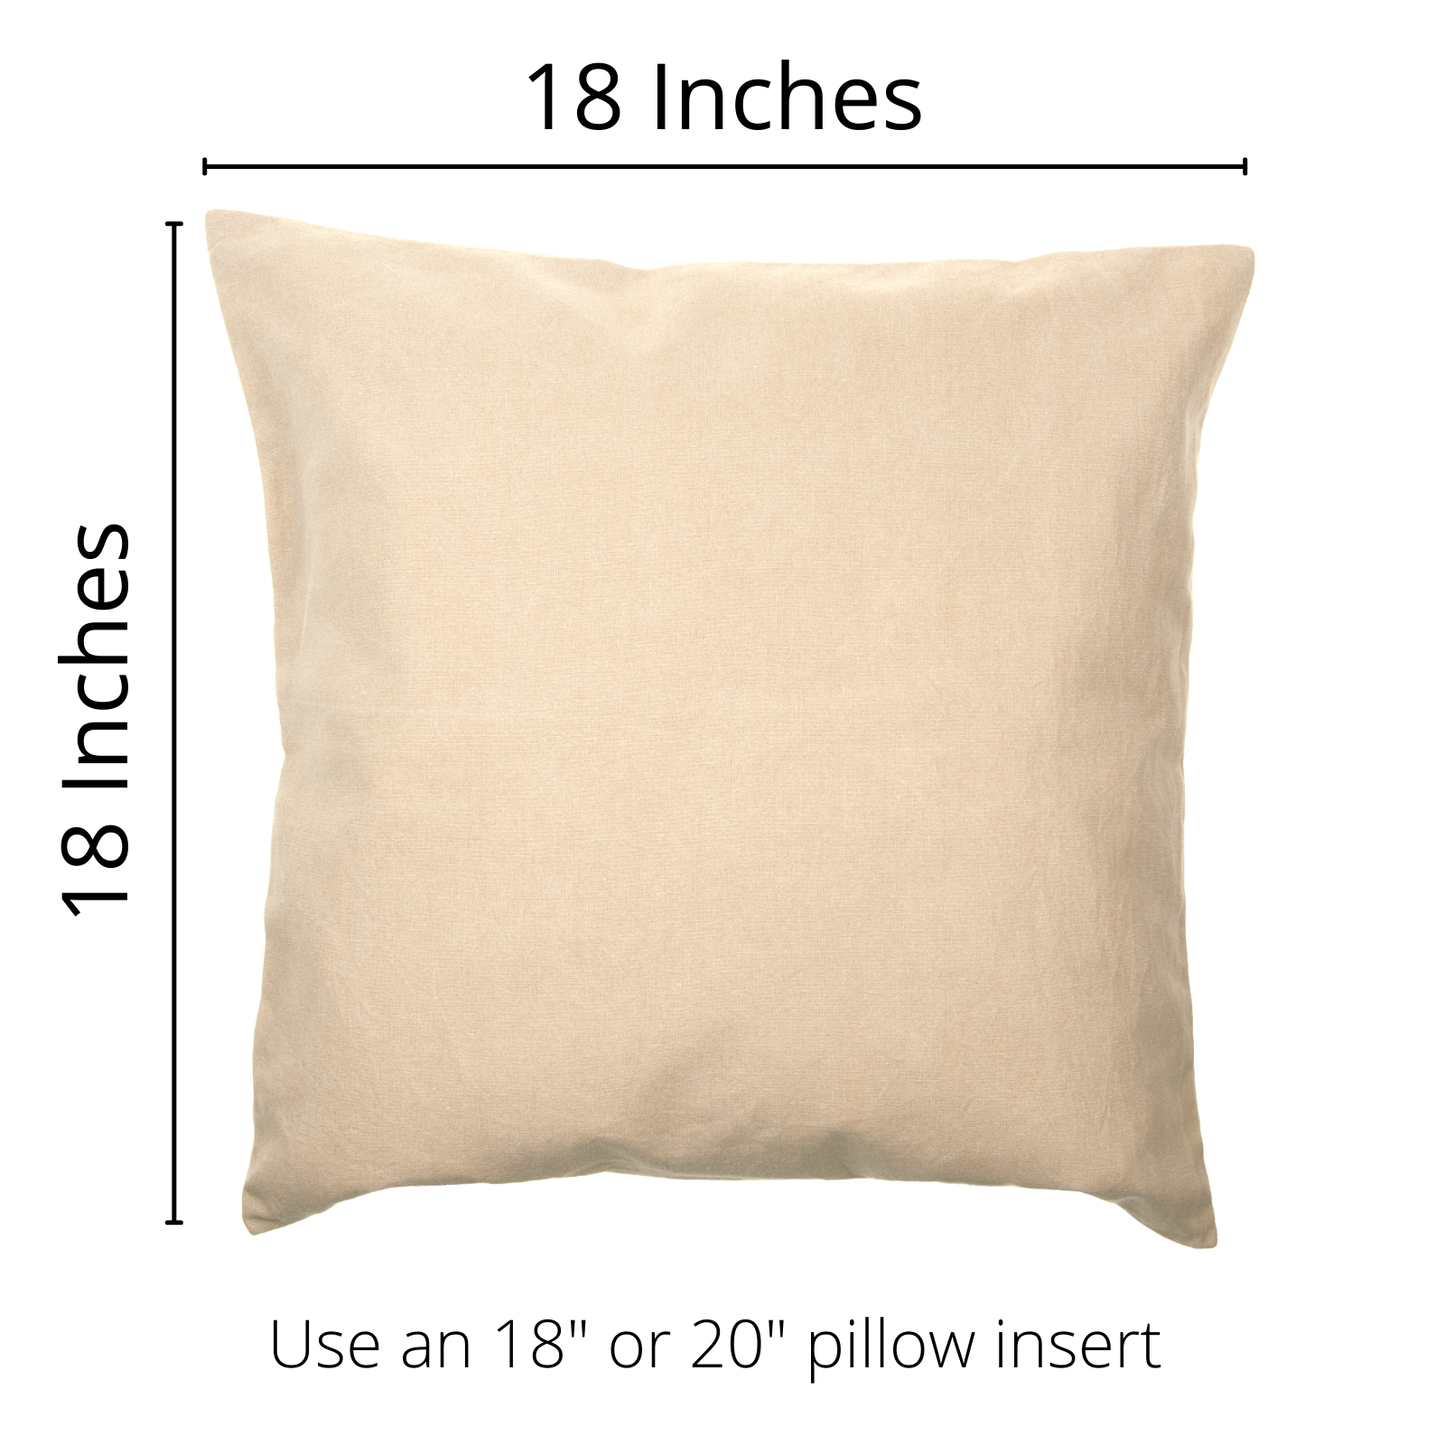 Personalized Proud To Be American Pillow Cover